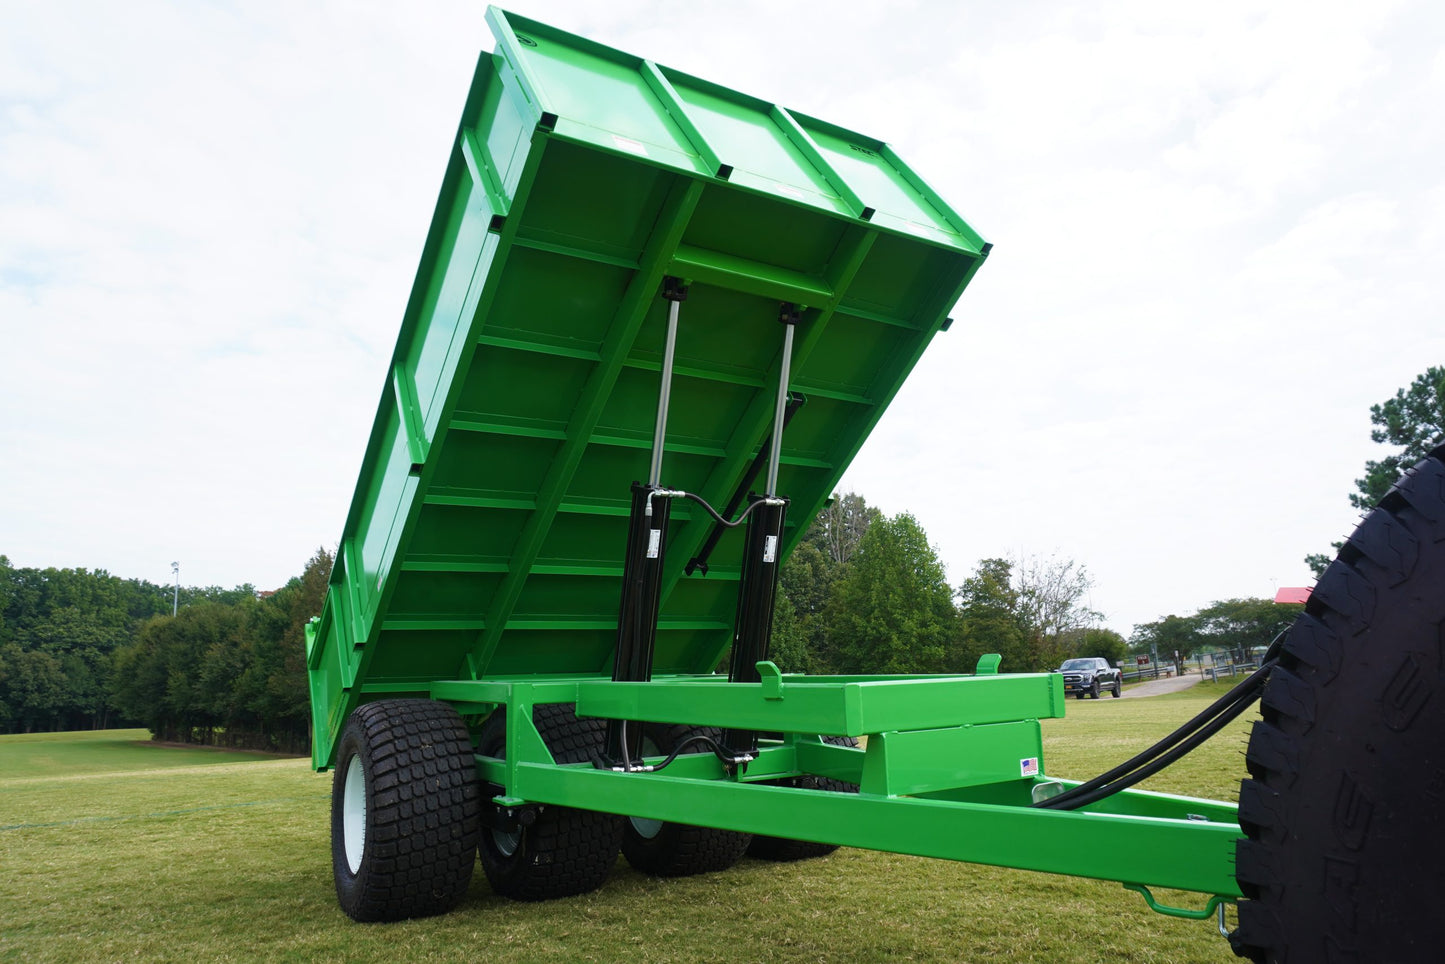 STEC DT711 DUMP TRAILER WITH OVERSIZED TURF TIRES